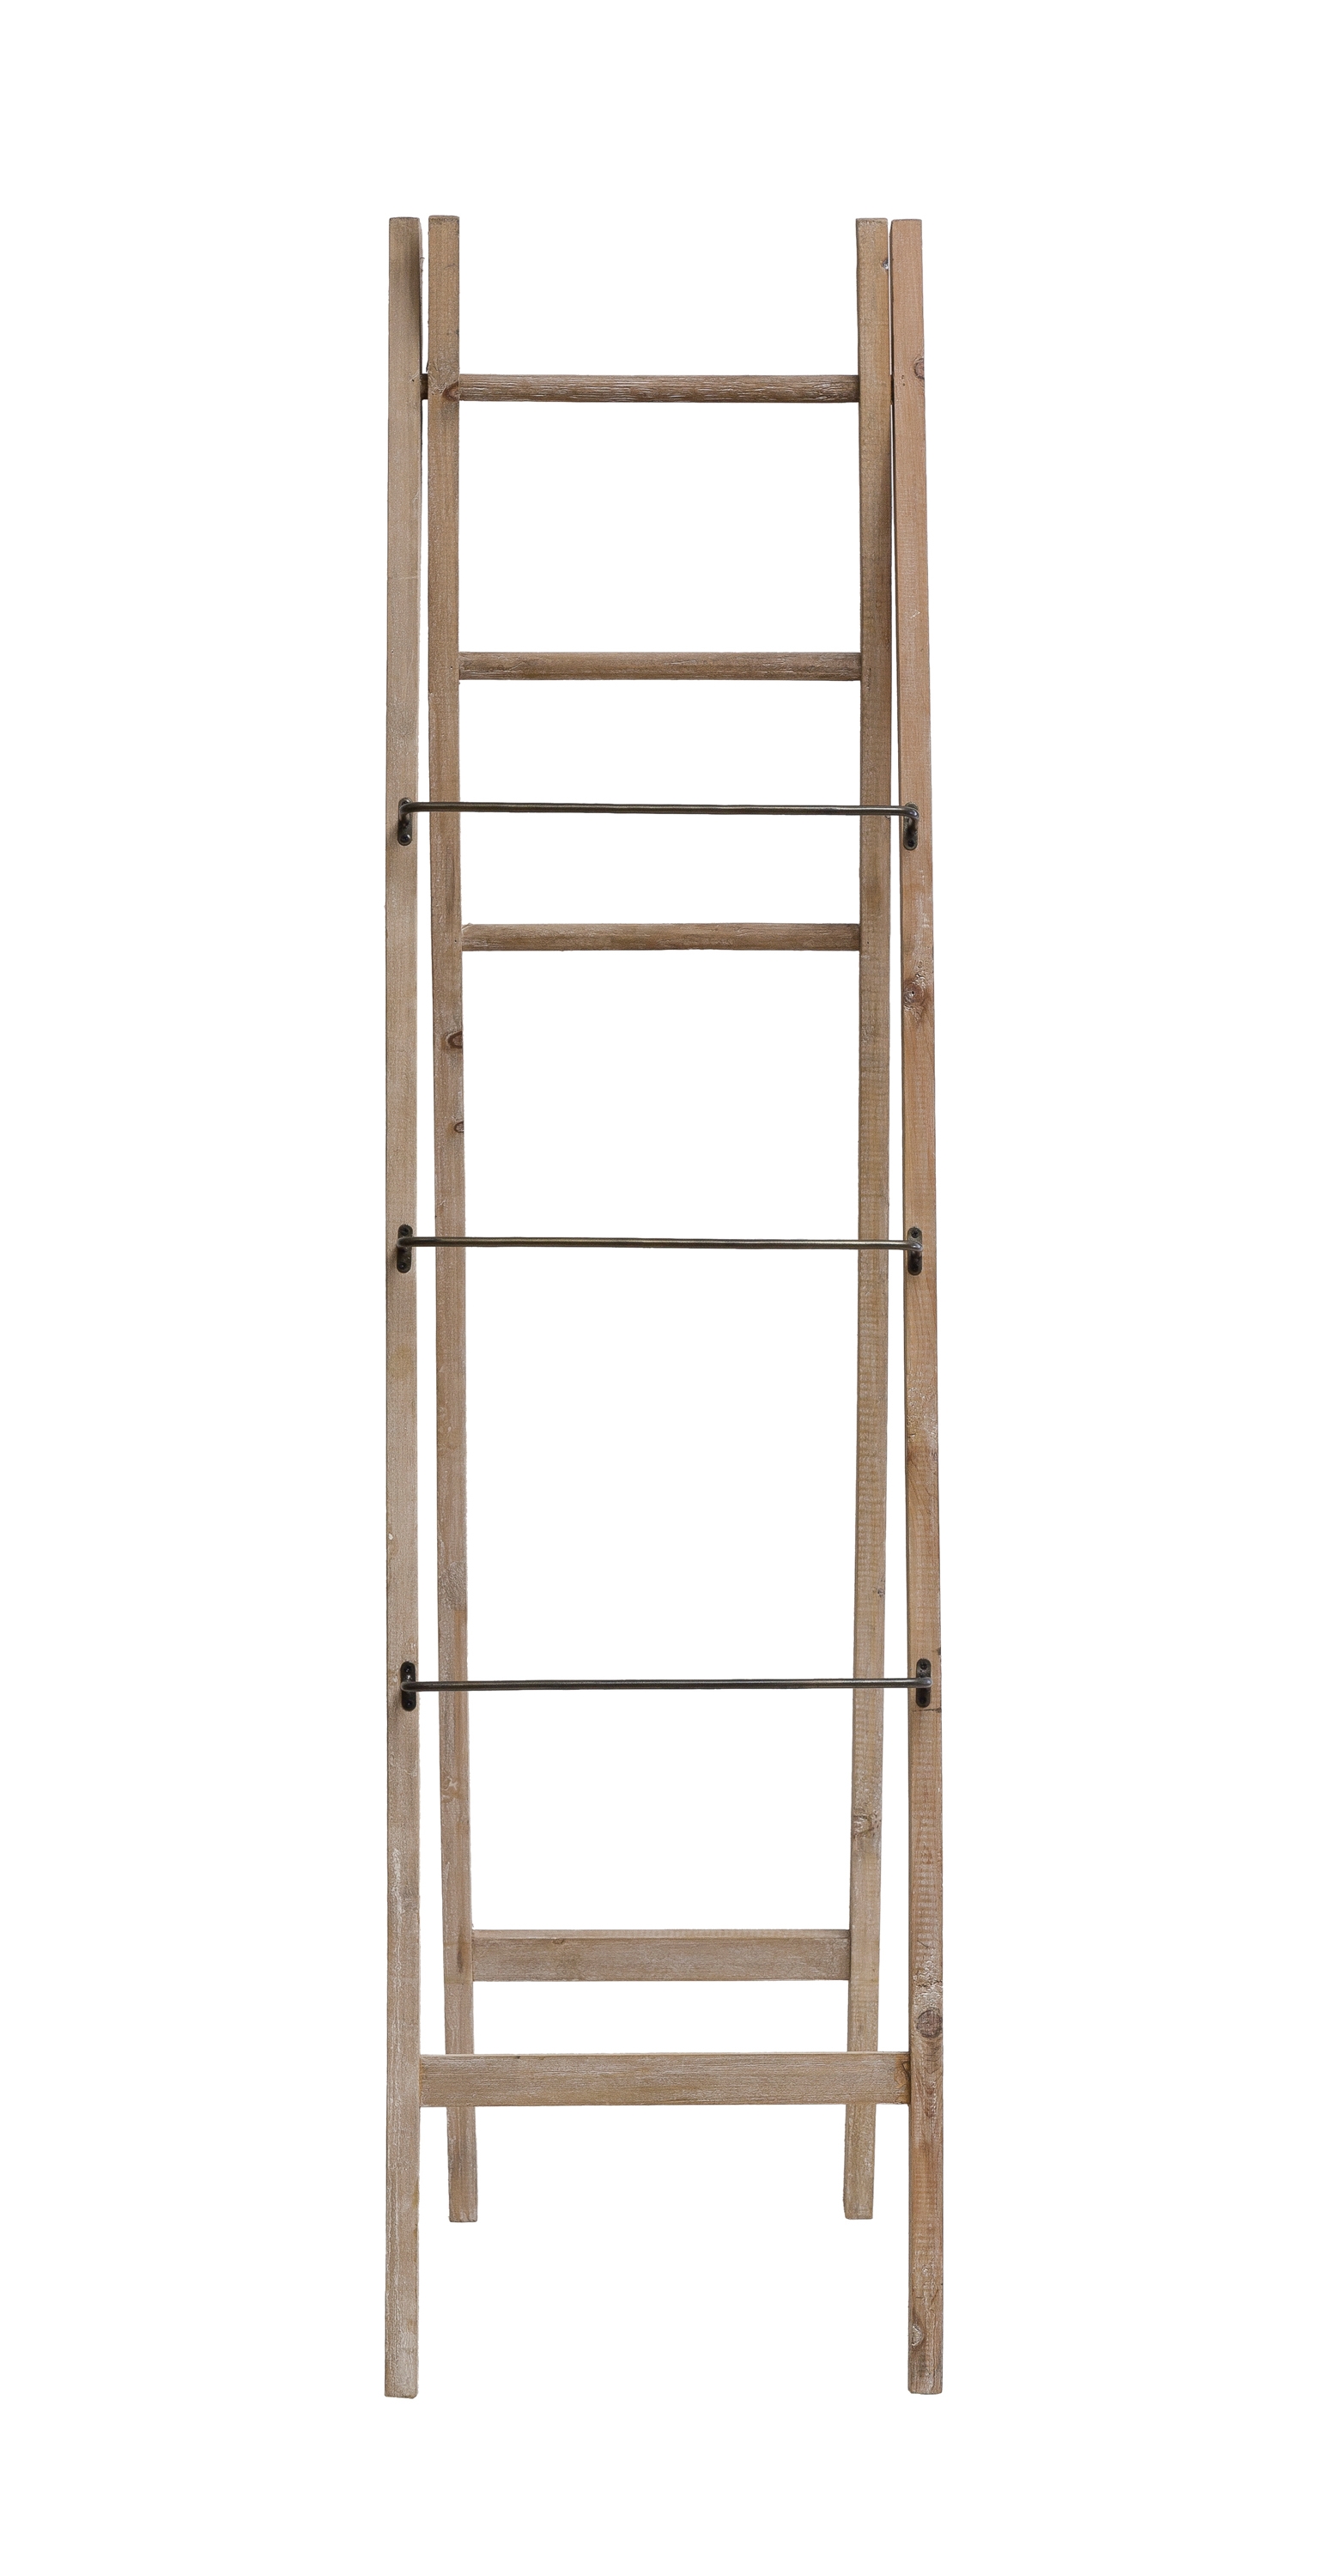 2-Sided 71"H Decorative A-Frame Fir Wood Ladder with Metal & Wood Rungs - Image 0